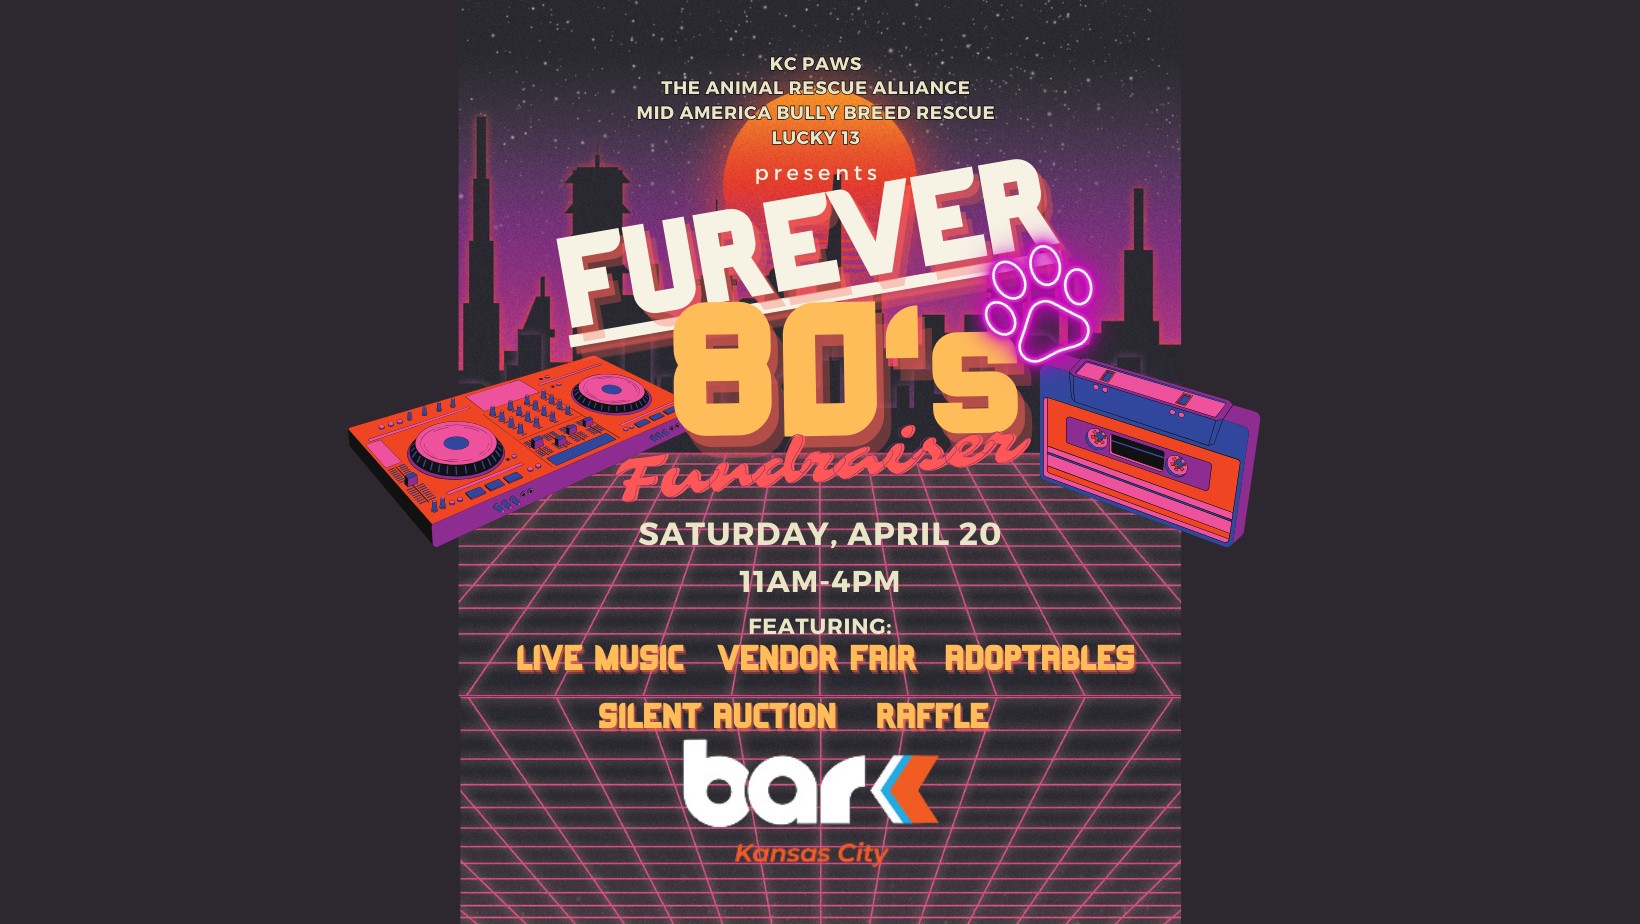 KC Paws, the animal rescue alliance, mid america bully breed rescue, and luck 13 presents furever 80's fundraiser. Saturday , april 20 from 11 am to 4 pm featuring live music, vendor fair, adoptables, silent auction, and raffle. Bar K Kansas City.